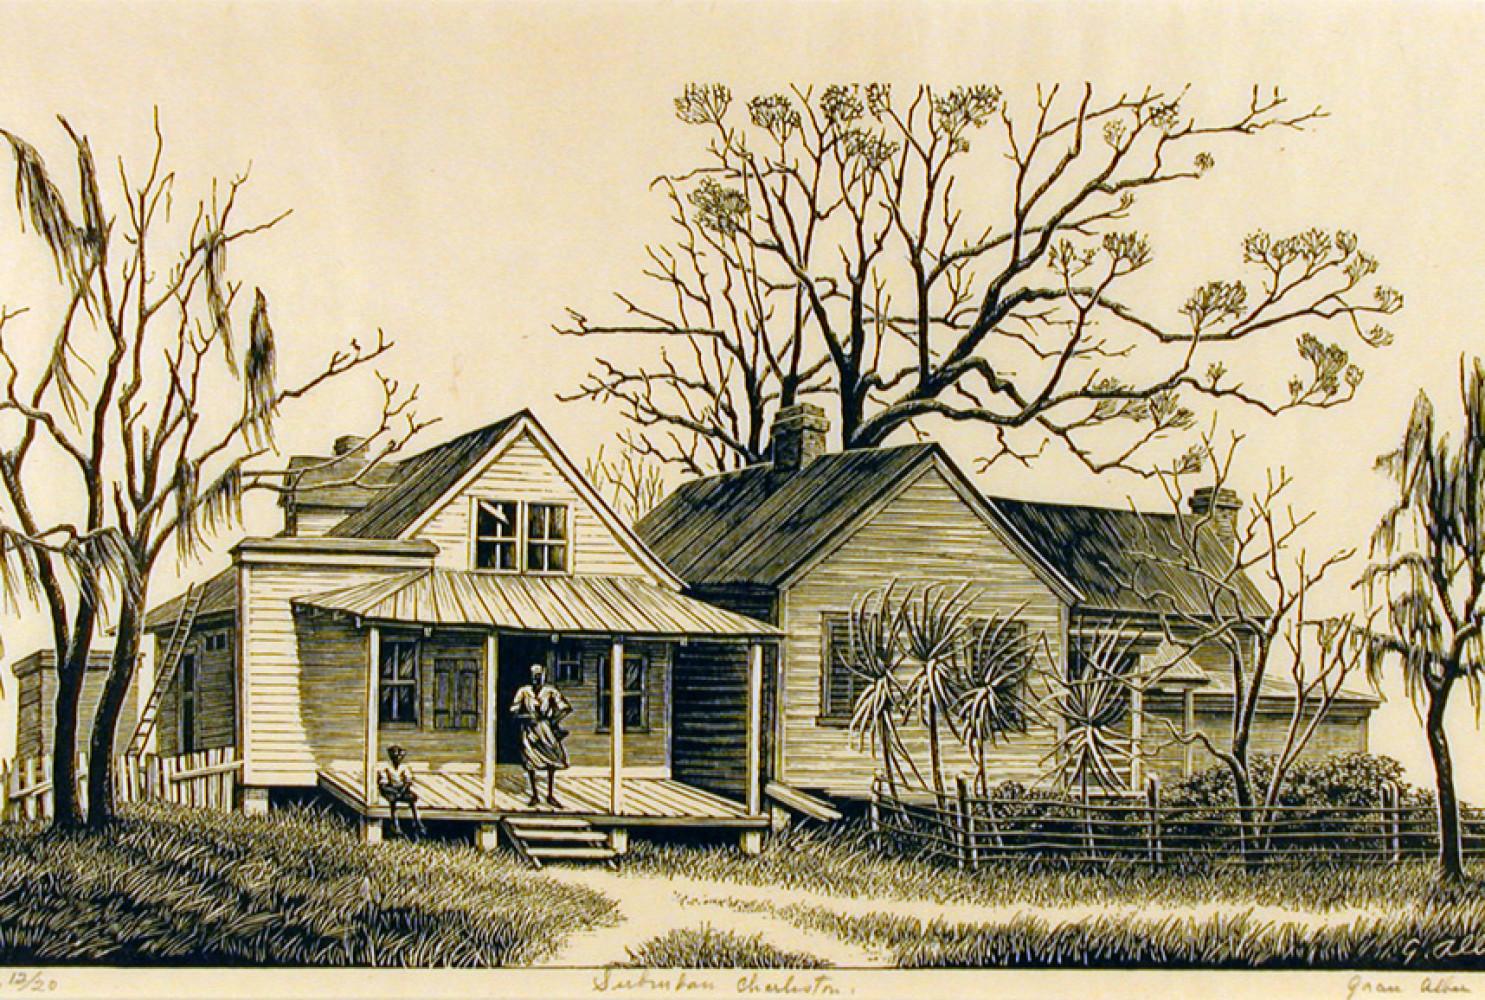 Suburban Charleston, ca. 1950, By Grace Albee (American, 1890—1985); Woodblock print on paper; 7 1/16 x 11 1/8 inches; Museum purchase; 1998.007.0002
